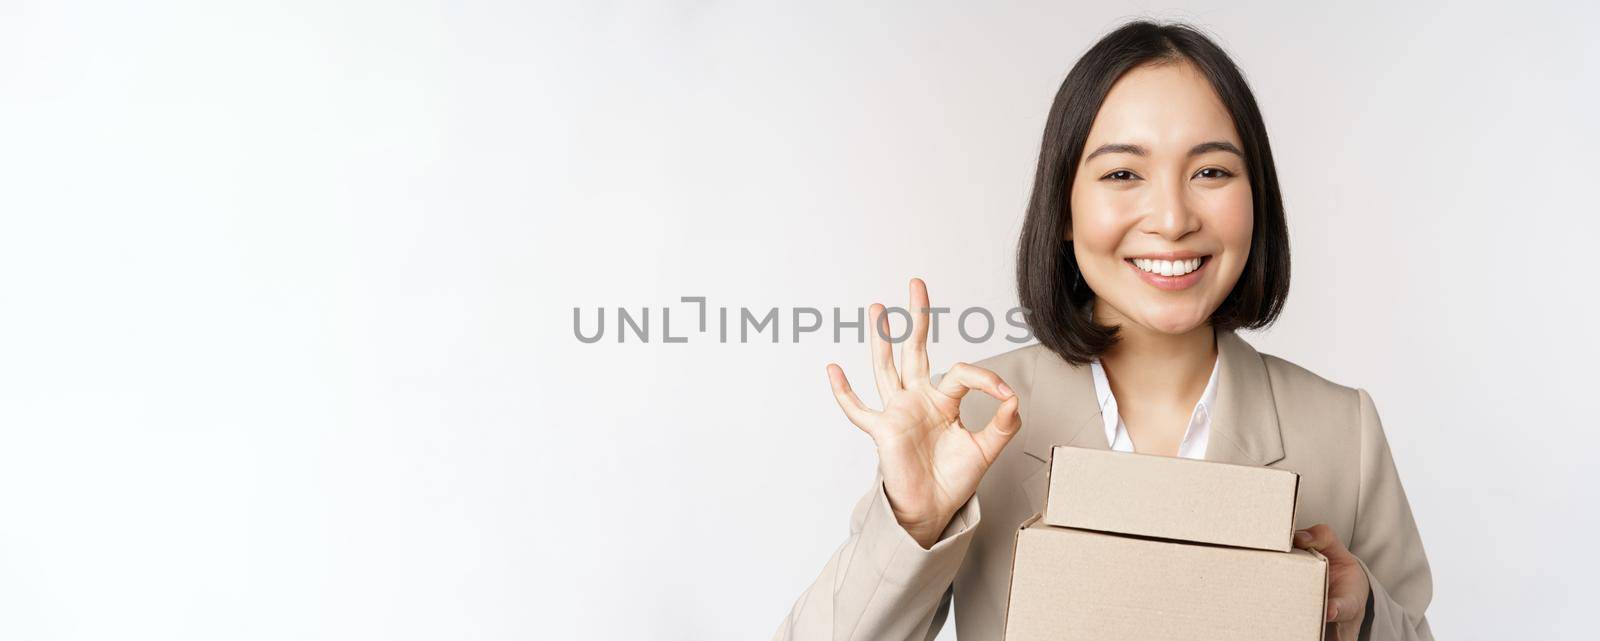 Smiling asian businesswoman, showing okay sign and boxes with delivery goods, prepare order for client, standing over white background.